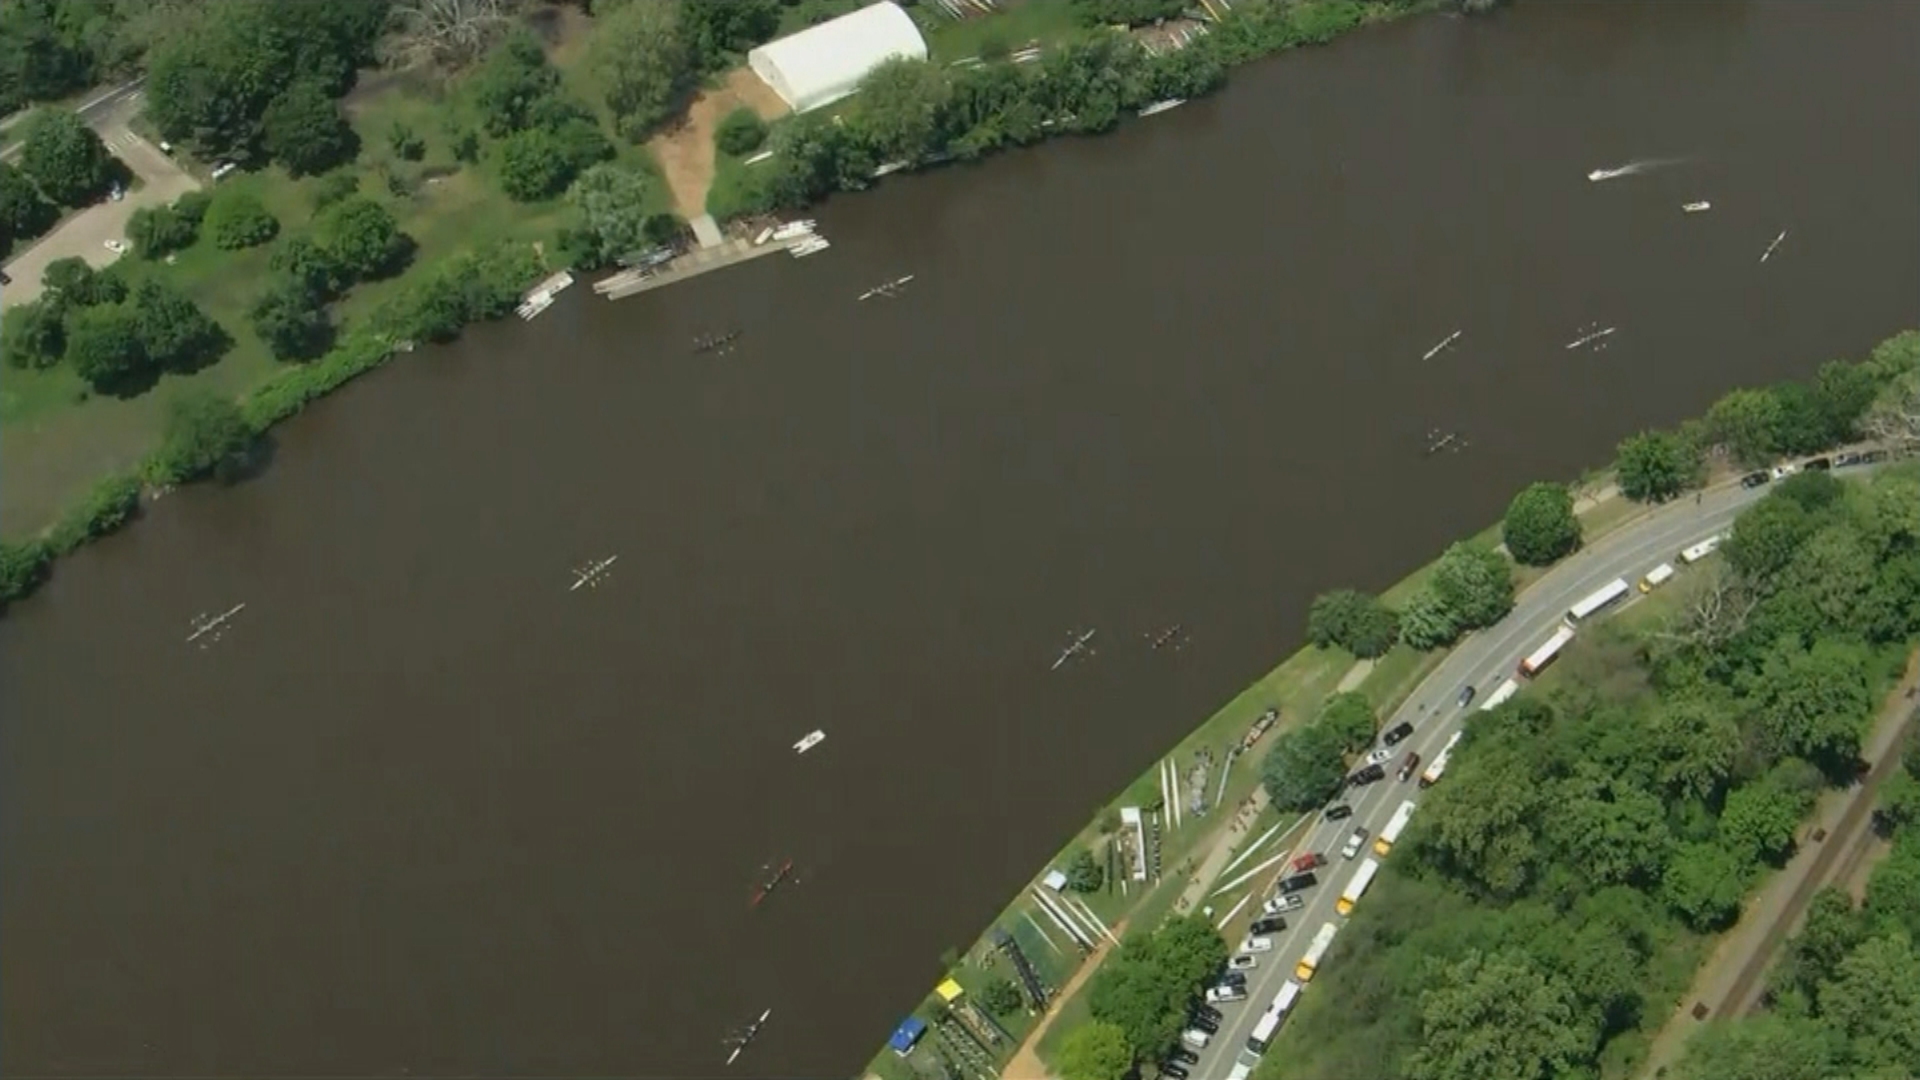  Thousands Of Young Rowers Compete In 95th Annual Stotesbury Cup Regatta On Schuylkill River